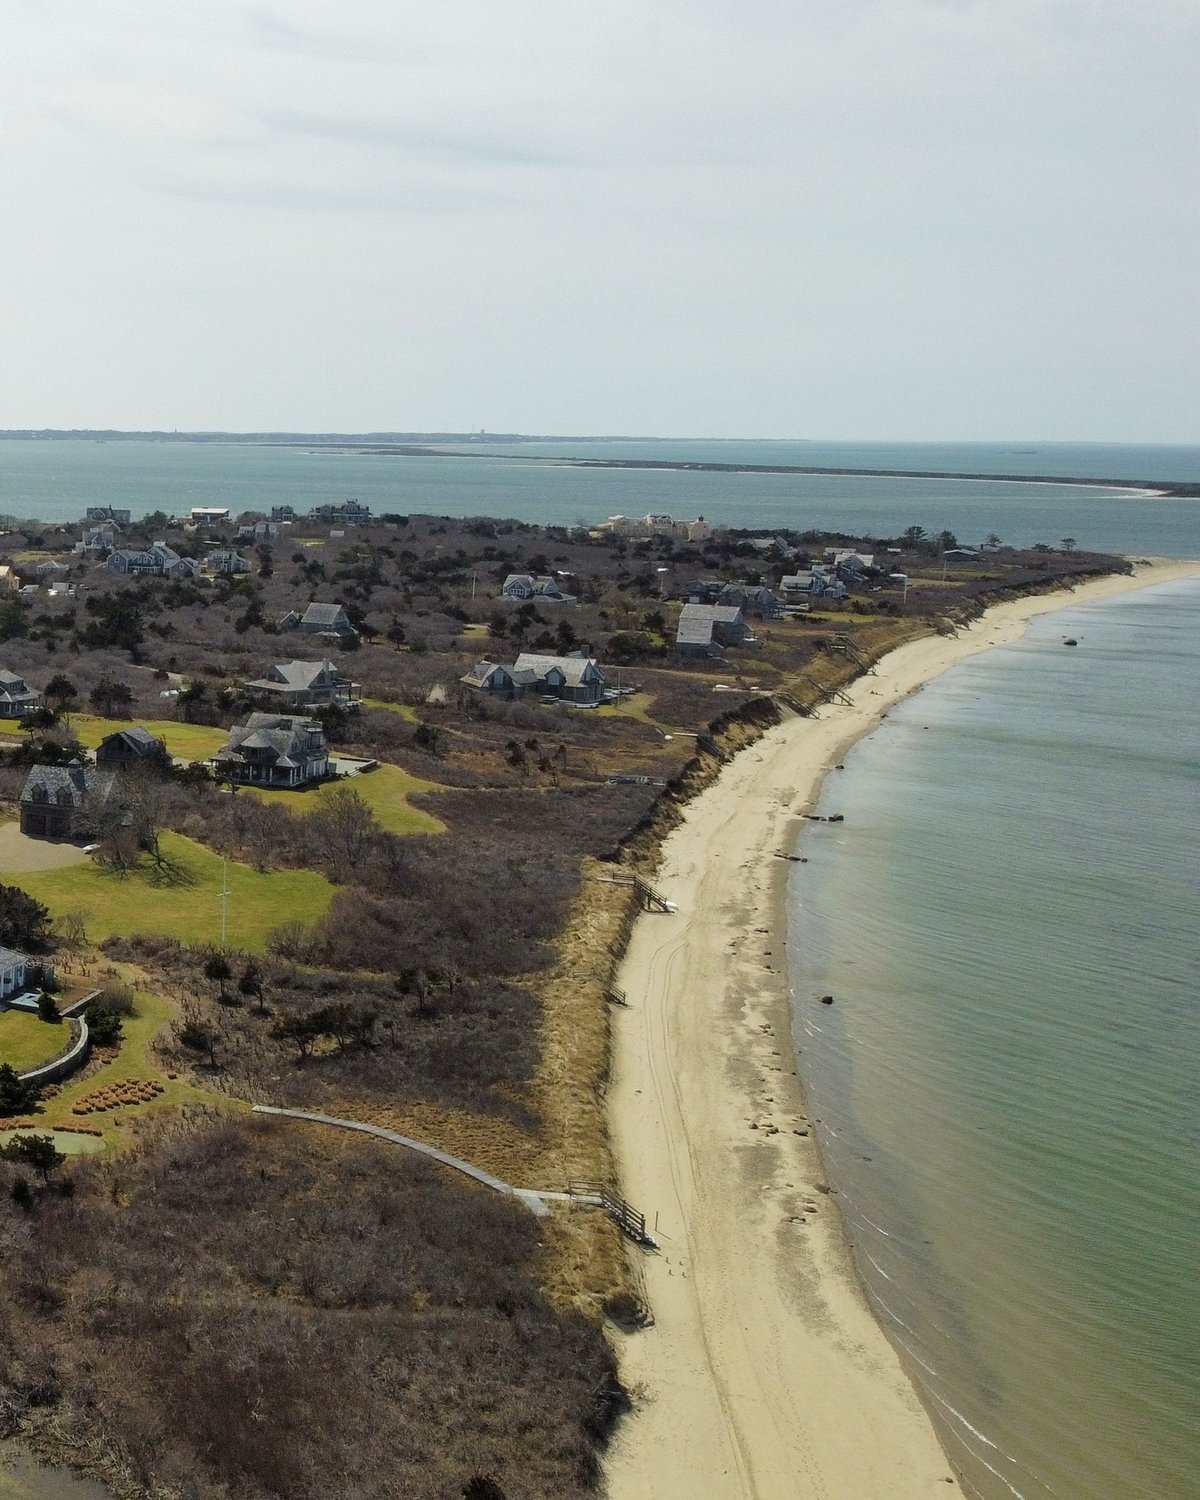 A drone's eye view of the shoreline.